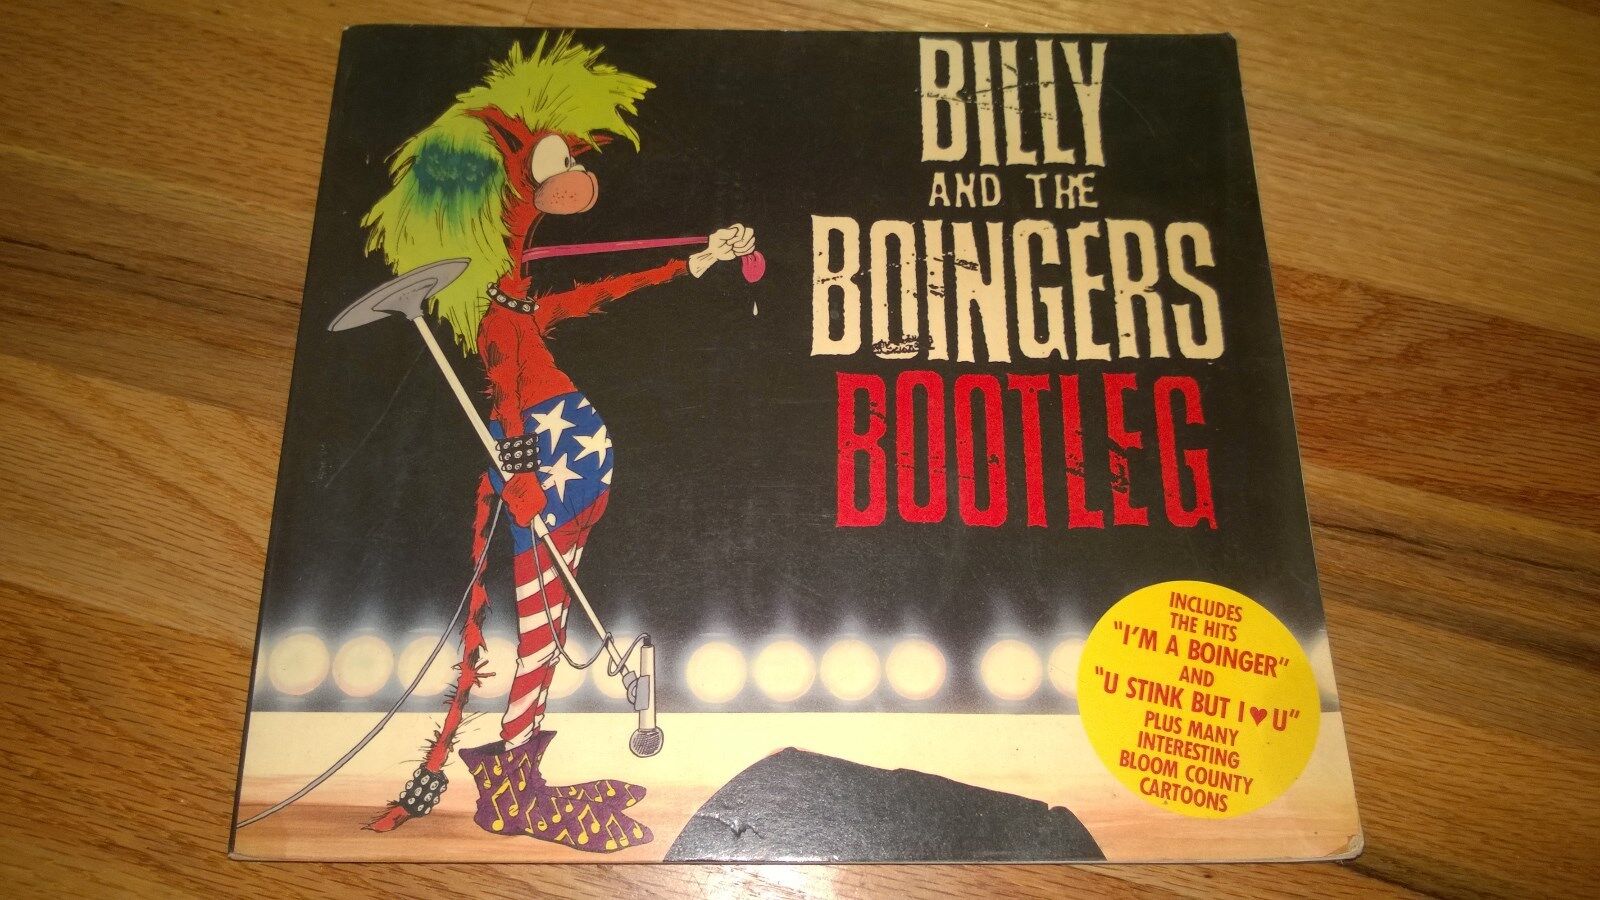 Vintage Billy and the Boingers Bootleg First Edition. BOOK-COMICS